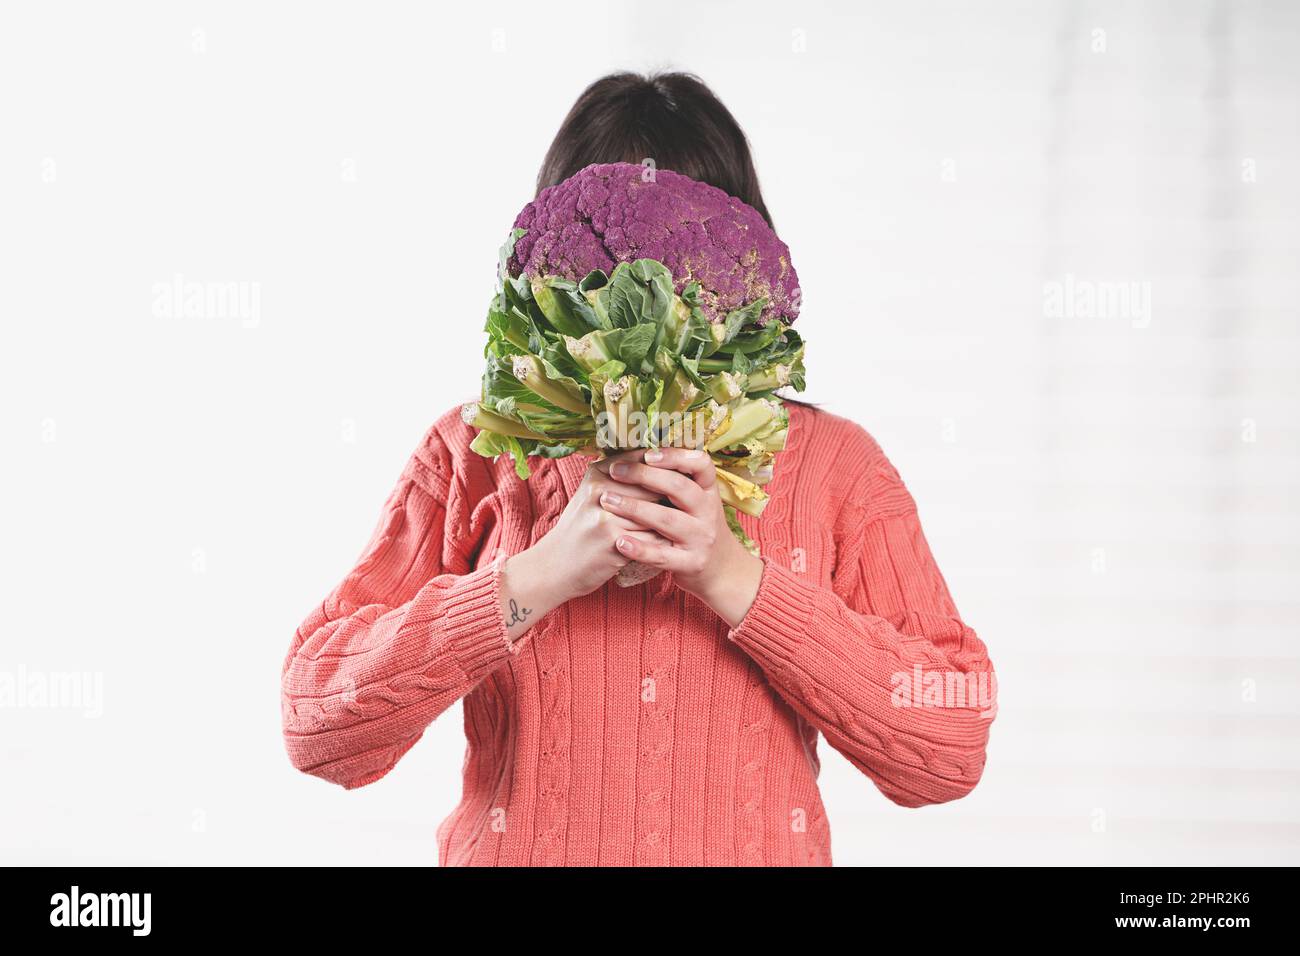 Cheerful young Caucasian woman playfully hiding her face behind a cauliflower, holding it with both hands, standing by a window with a white curtain. Stock Photo